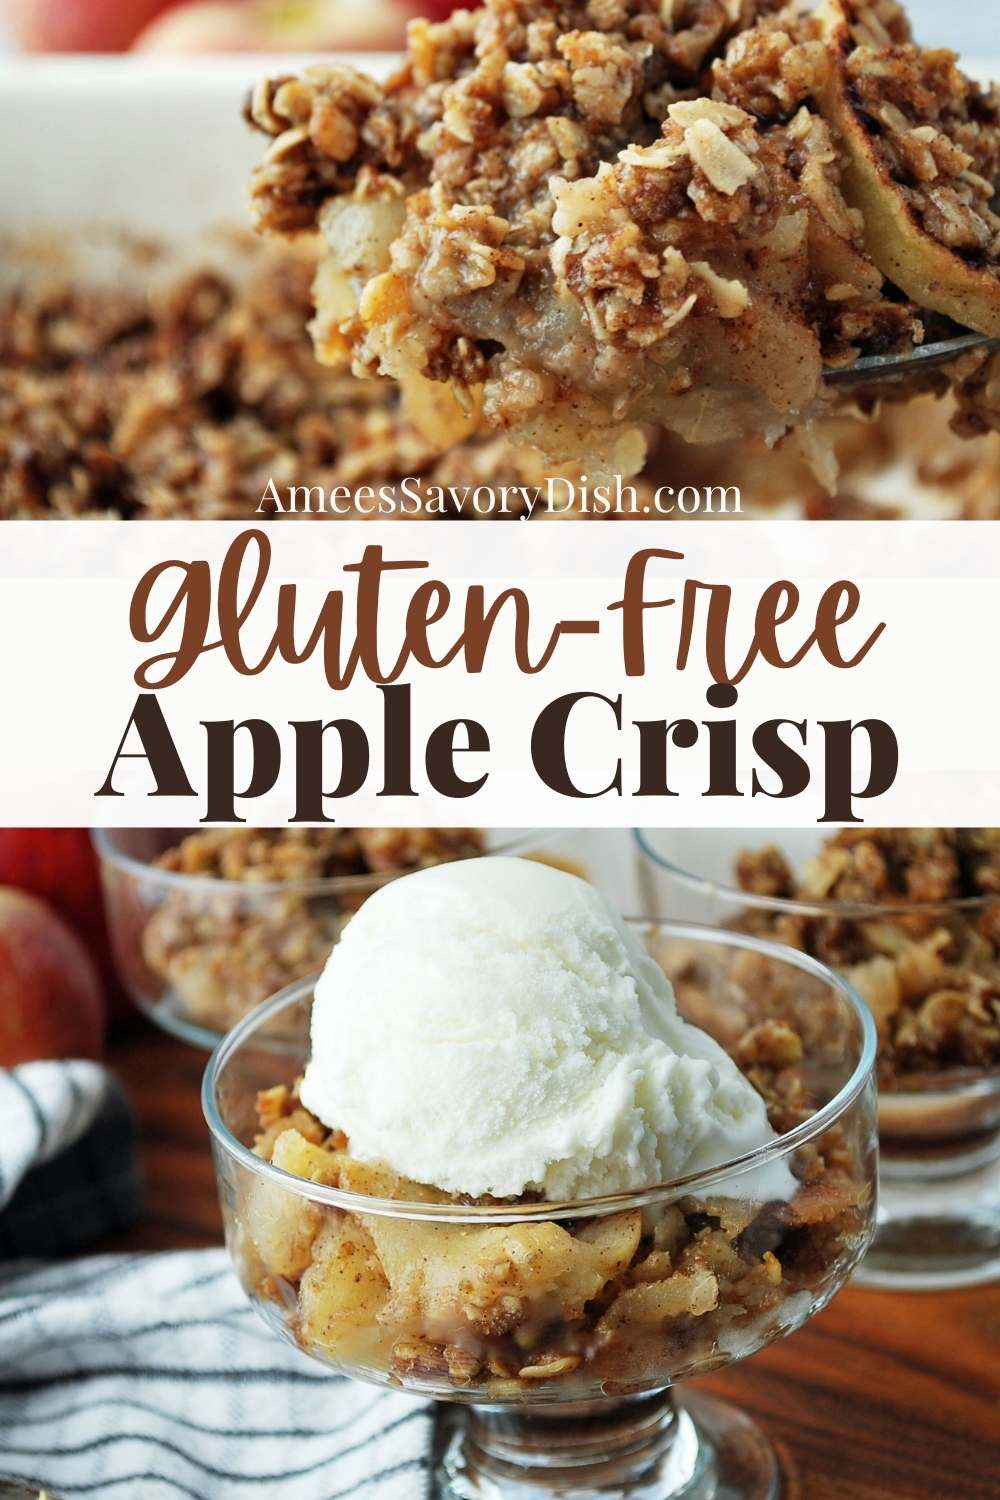 Gluten-Free Apple Crisp -sweet and spiced baked apples topped with a perfectly crisped oat and flour crisp topping, just as delicious as the original. This healthy apple crisp is the best variation of a classic fall favorite! via @Ameessavorydish